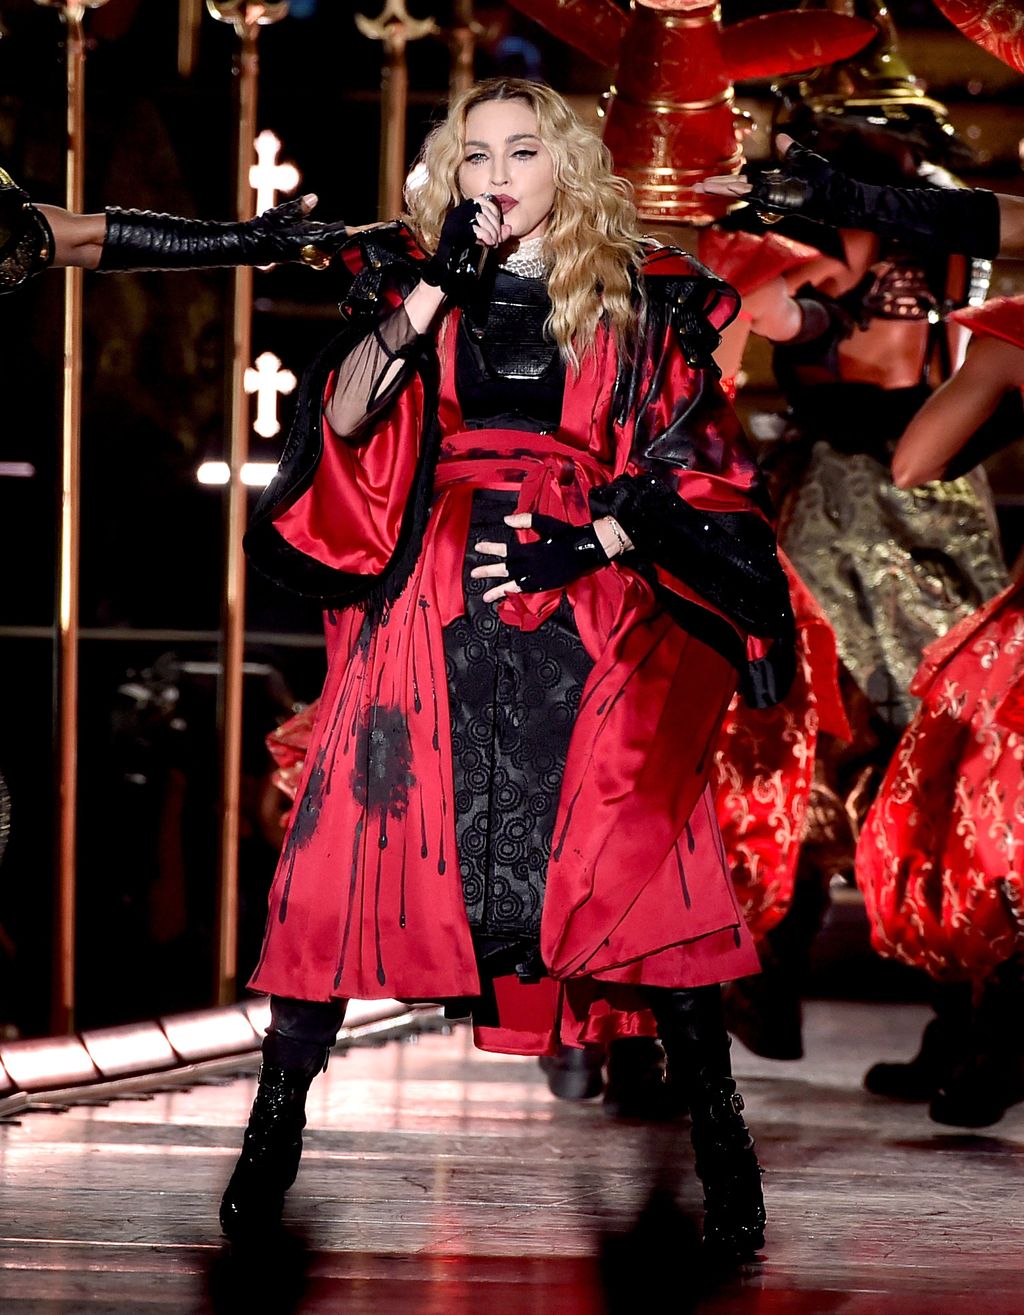 INGLEWOOD, CA - OCTOBER 27:  Singer Madonna performs during her 'Rebel Heart' tour at the Forum on October 27, 2015 in Inglewood, California.  (Photo by Kevin Winter/Getty Images)